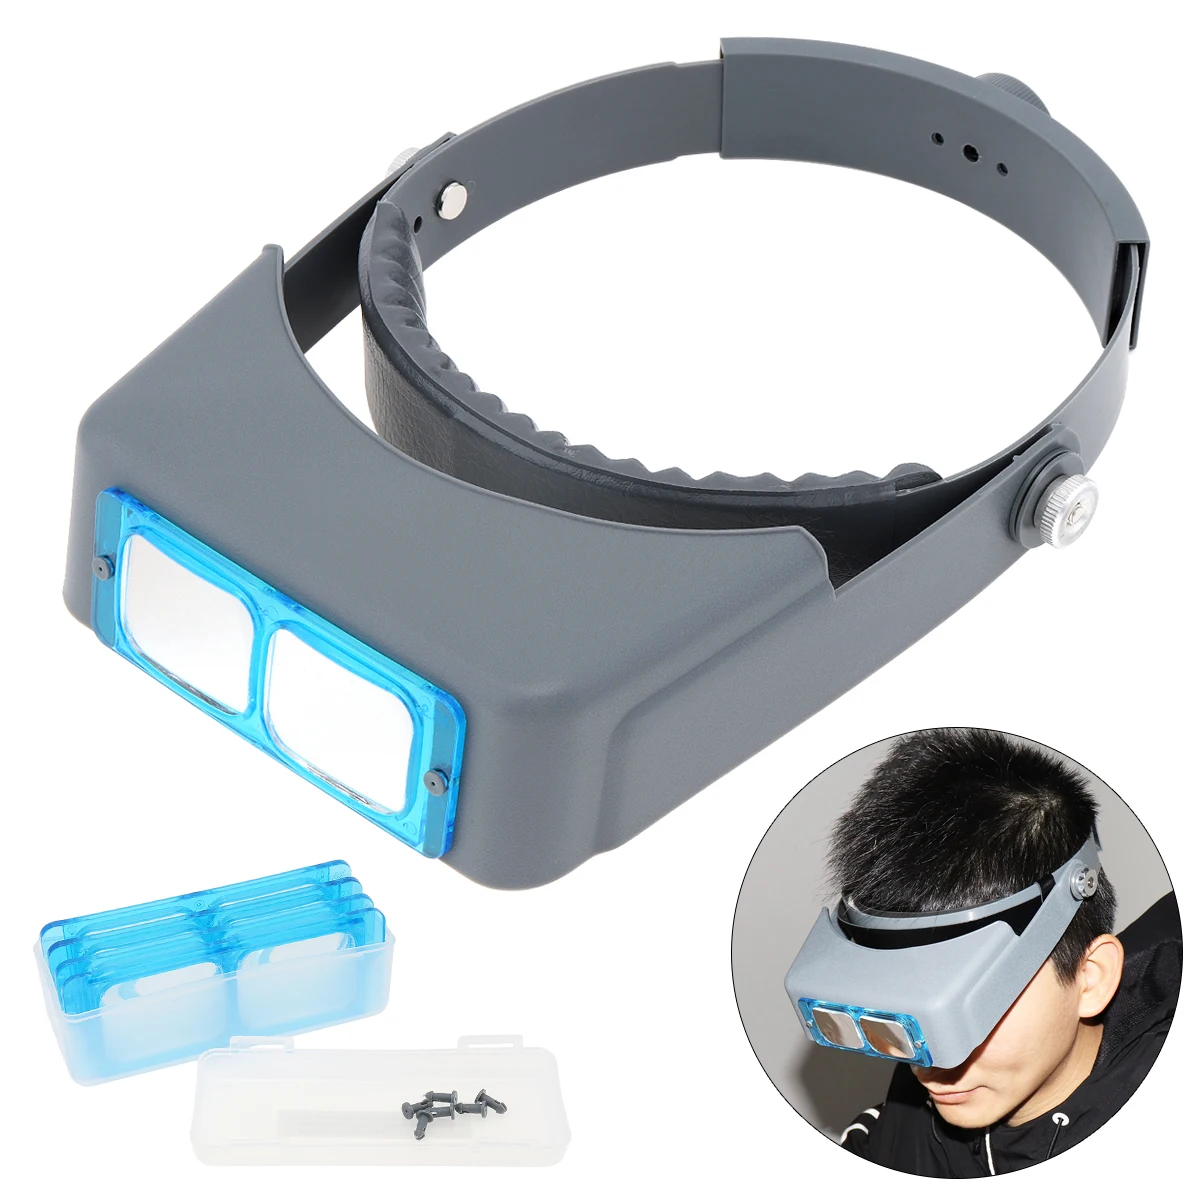 

81007-B Headband Adjustable Type Magnifying Glass With 4 Optical Glass Lens And Soft Leather Mats For Jewel Repair / Reading